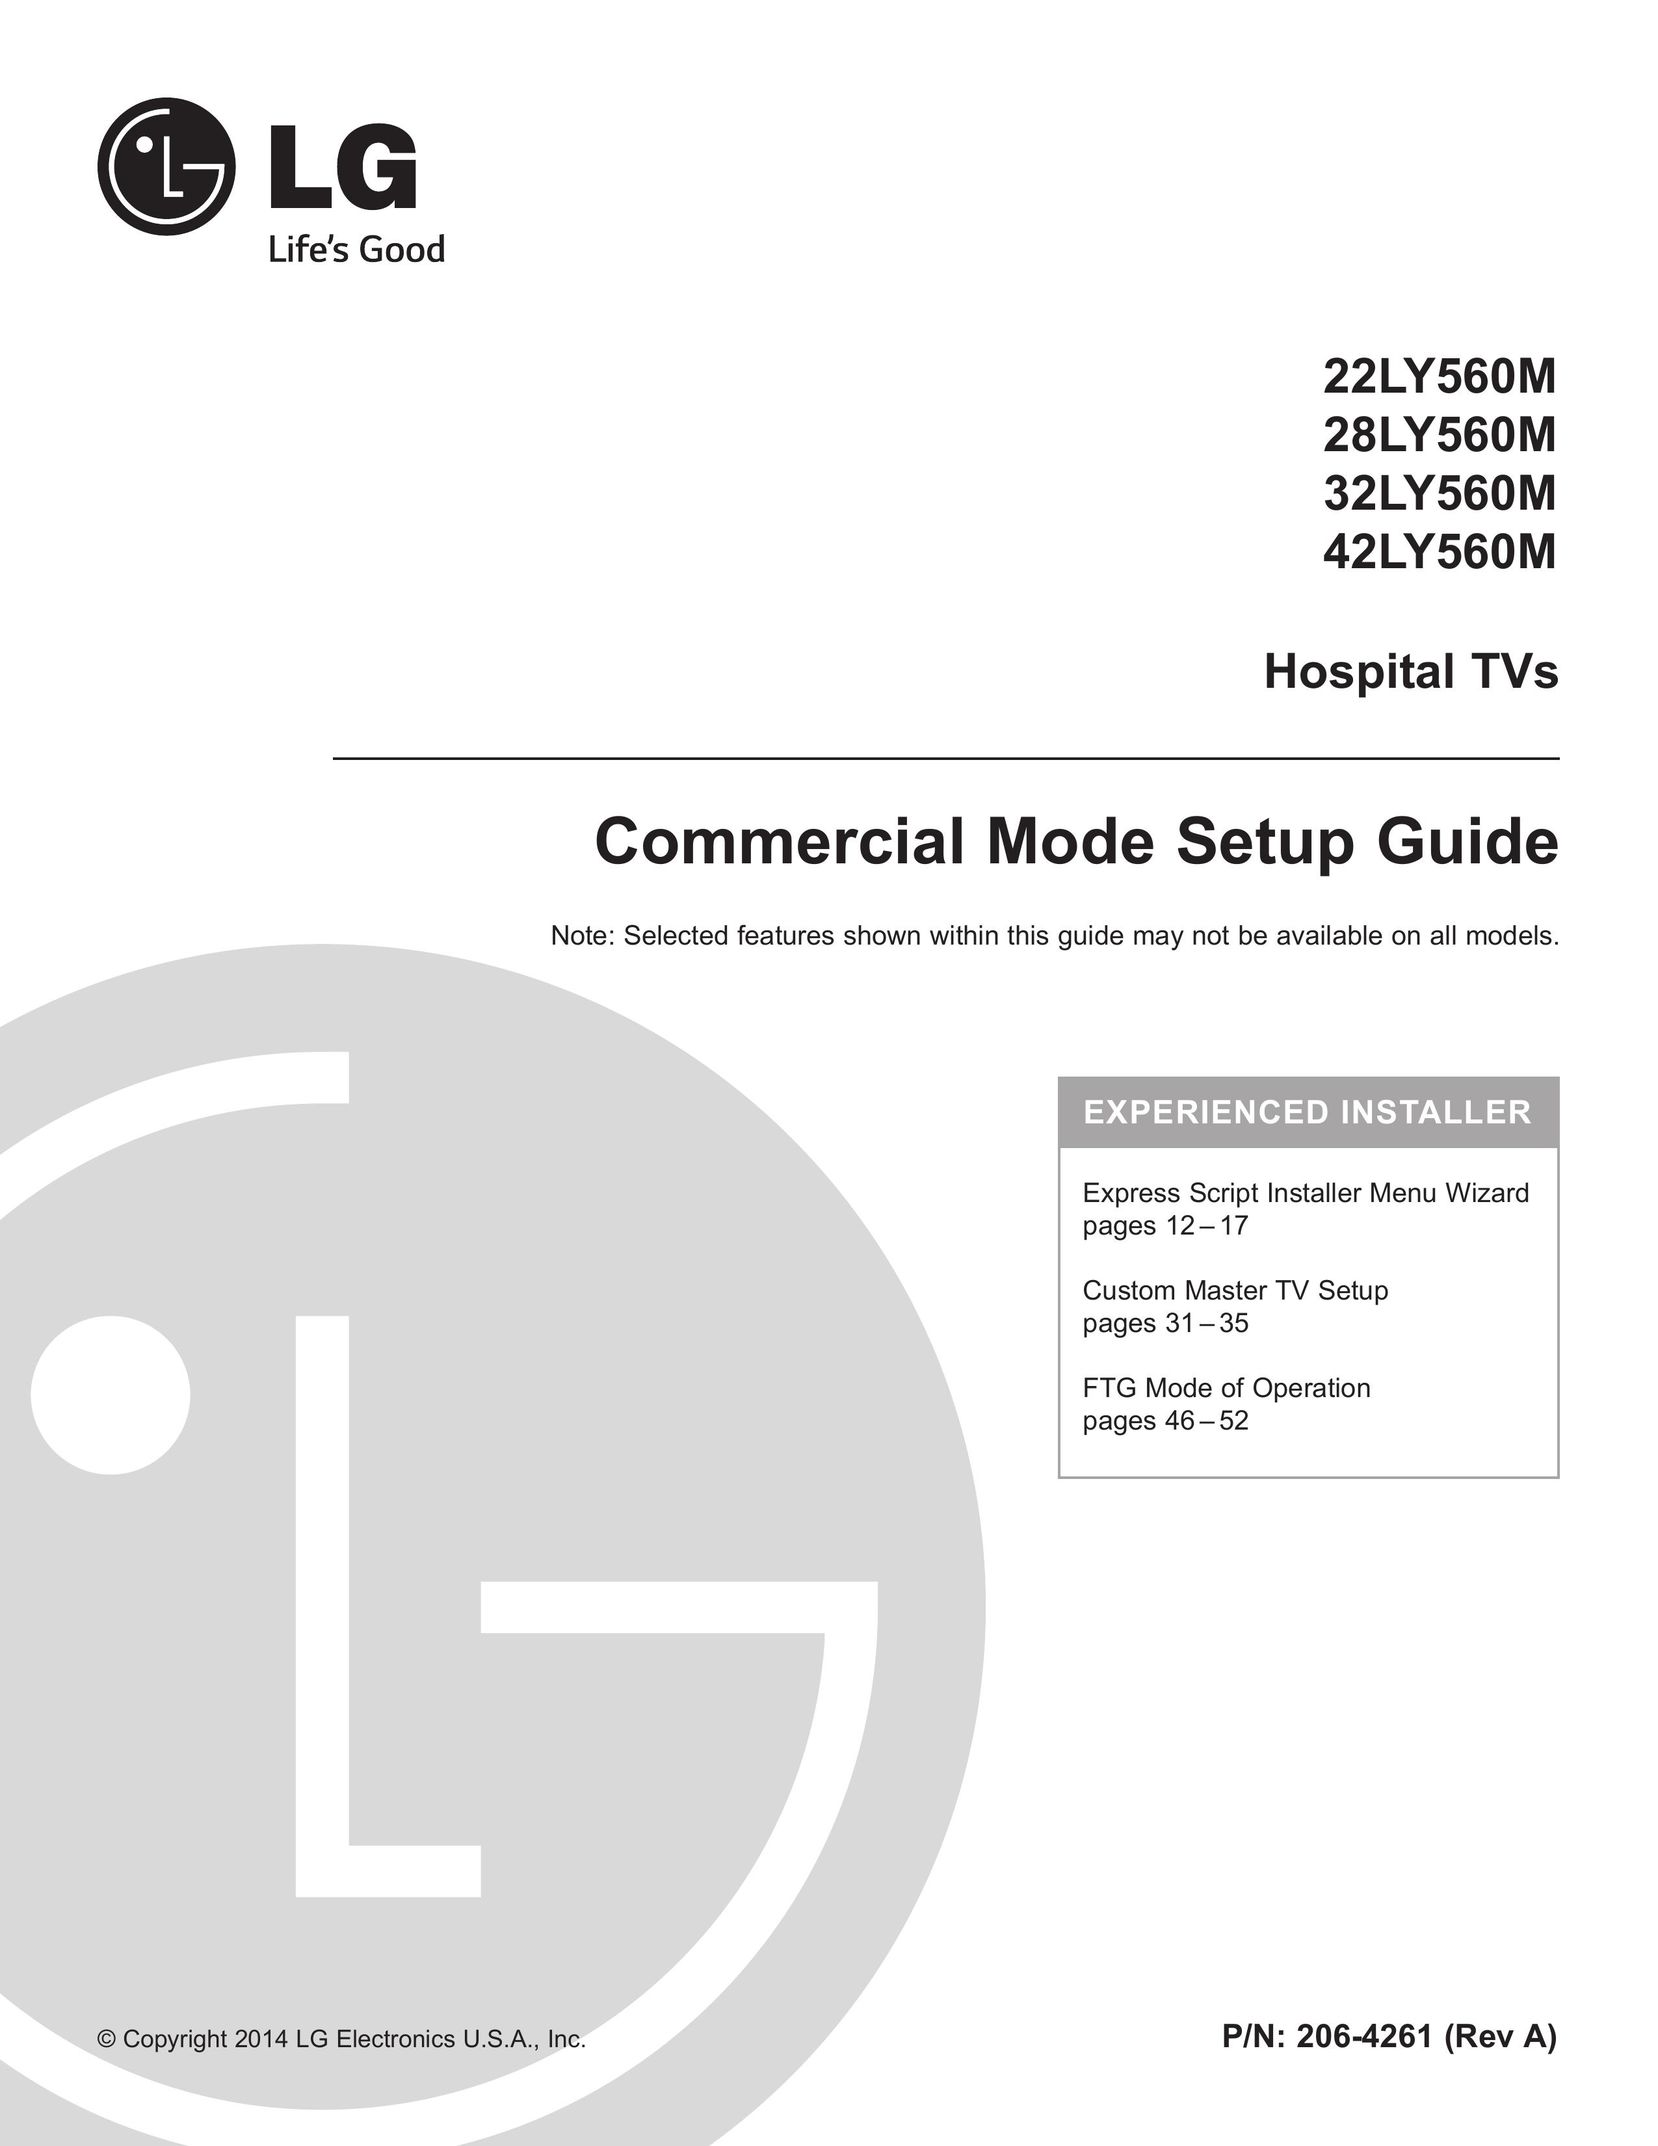 LG Electronics 28LY560M Car Satellite TV System User Manual (Page 1)